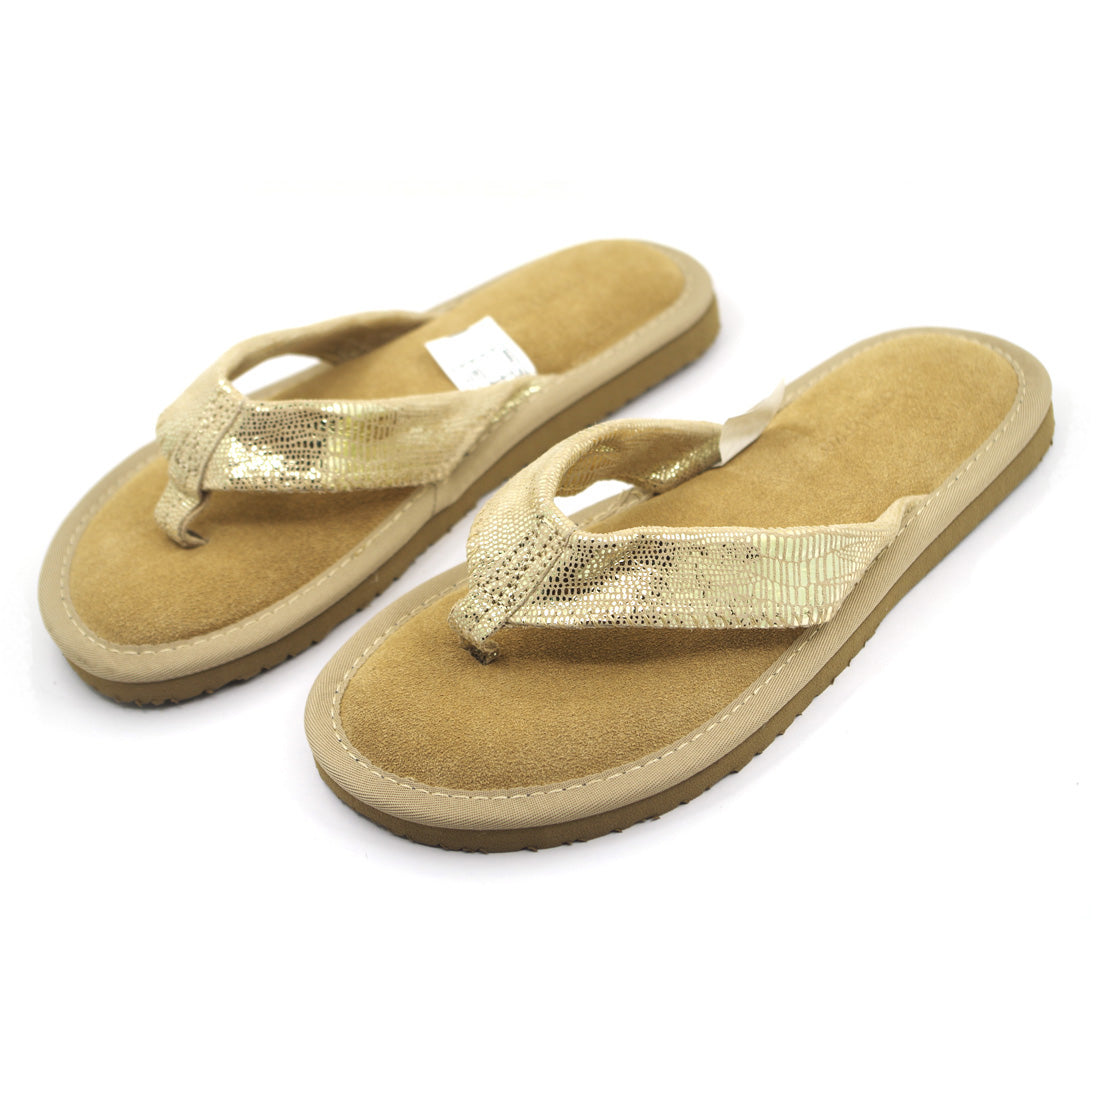 Harssidanzar Womens Indoor/Household and Outdoor Suede Leather Flip Flop Sandals GL204